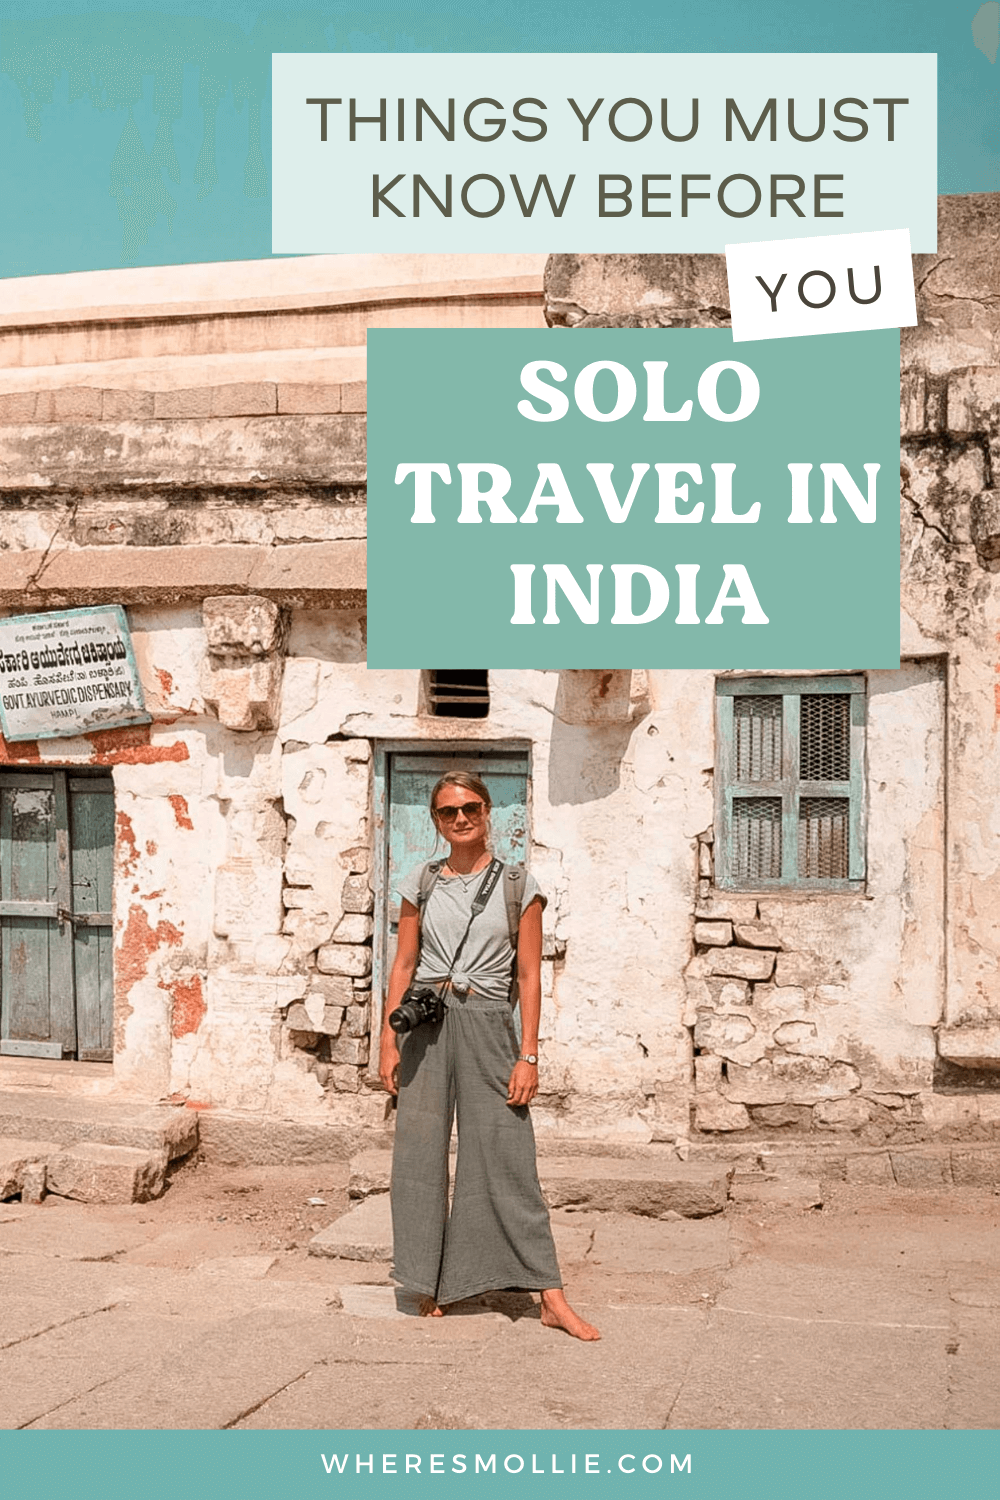 Things you should know before you solo travel in India